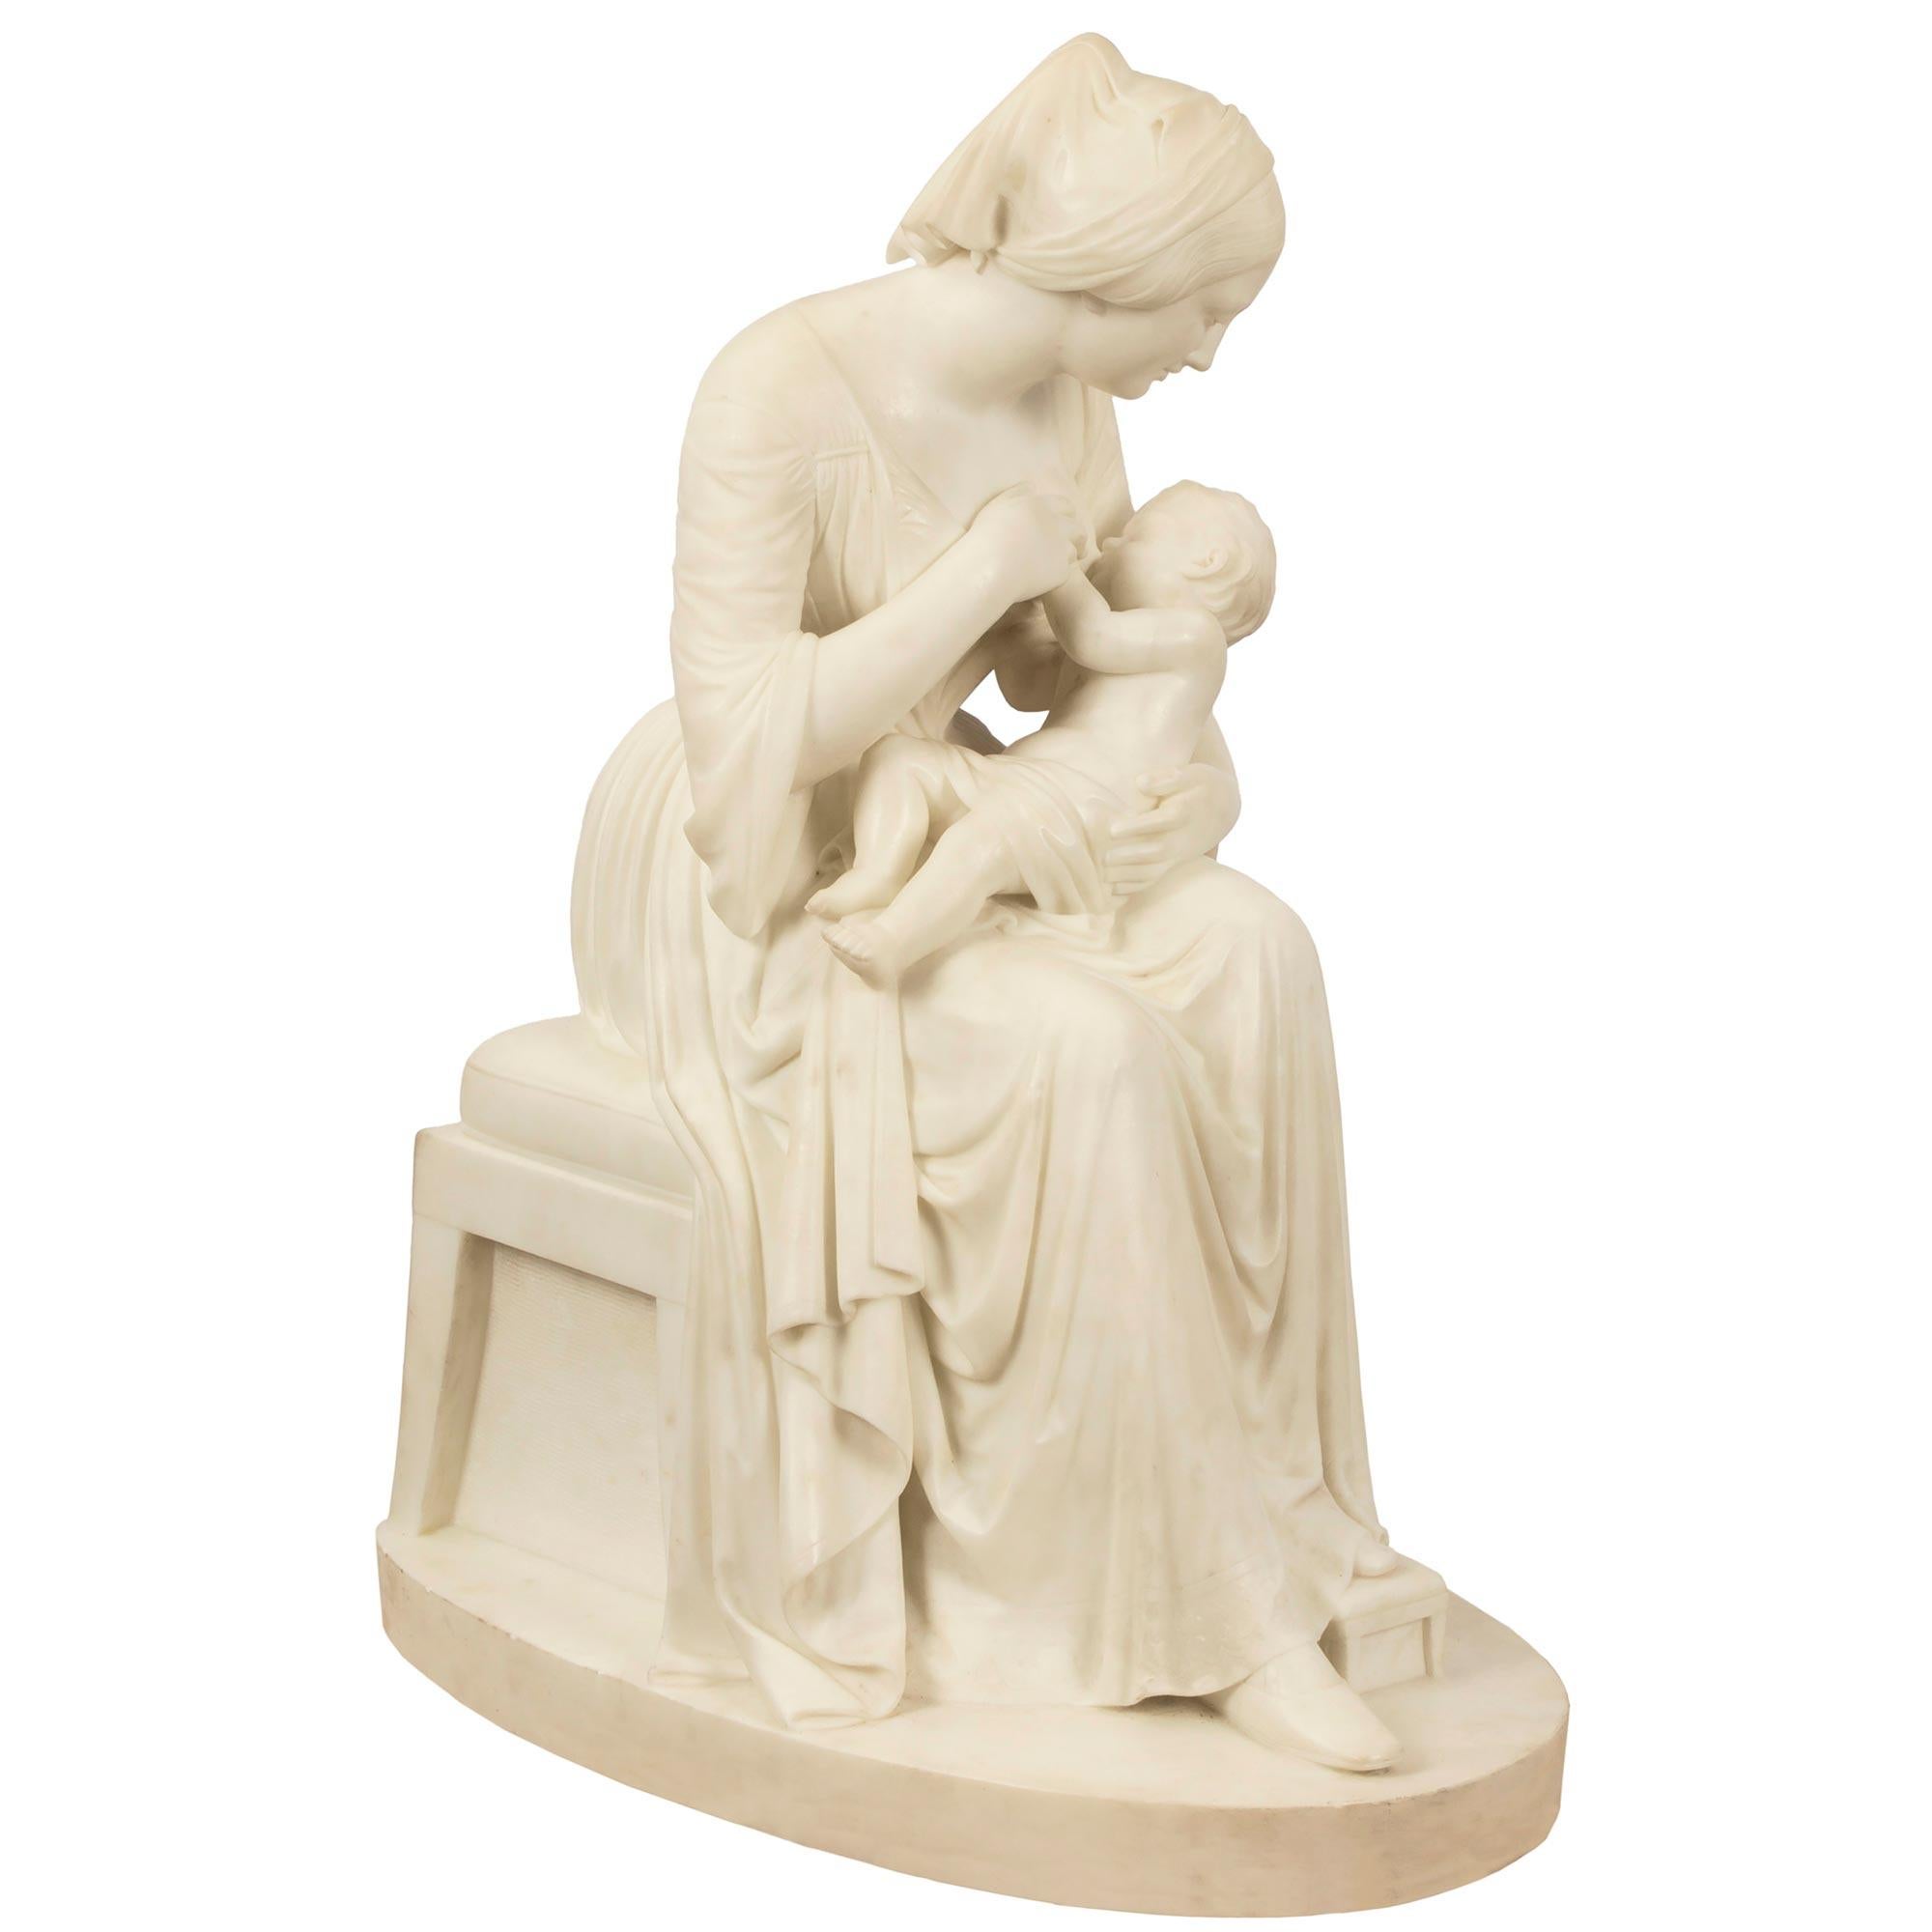 A charming and well executed Italian 19th century white Carrara marble statue of a mother breast feeding her child, signed P. Franchi, 1860. The statue is raised on an oval shaped base and is of a seated mother, in classical dress, with one leg